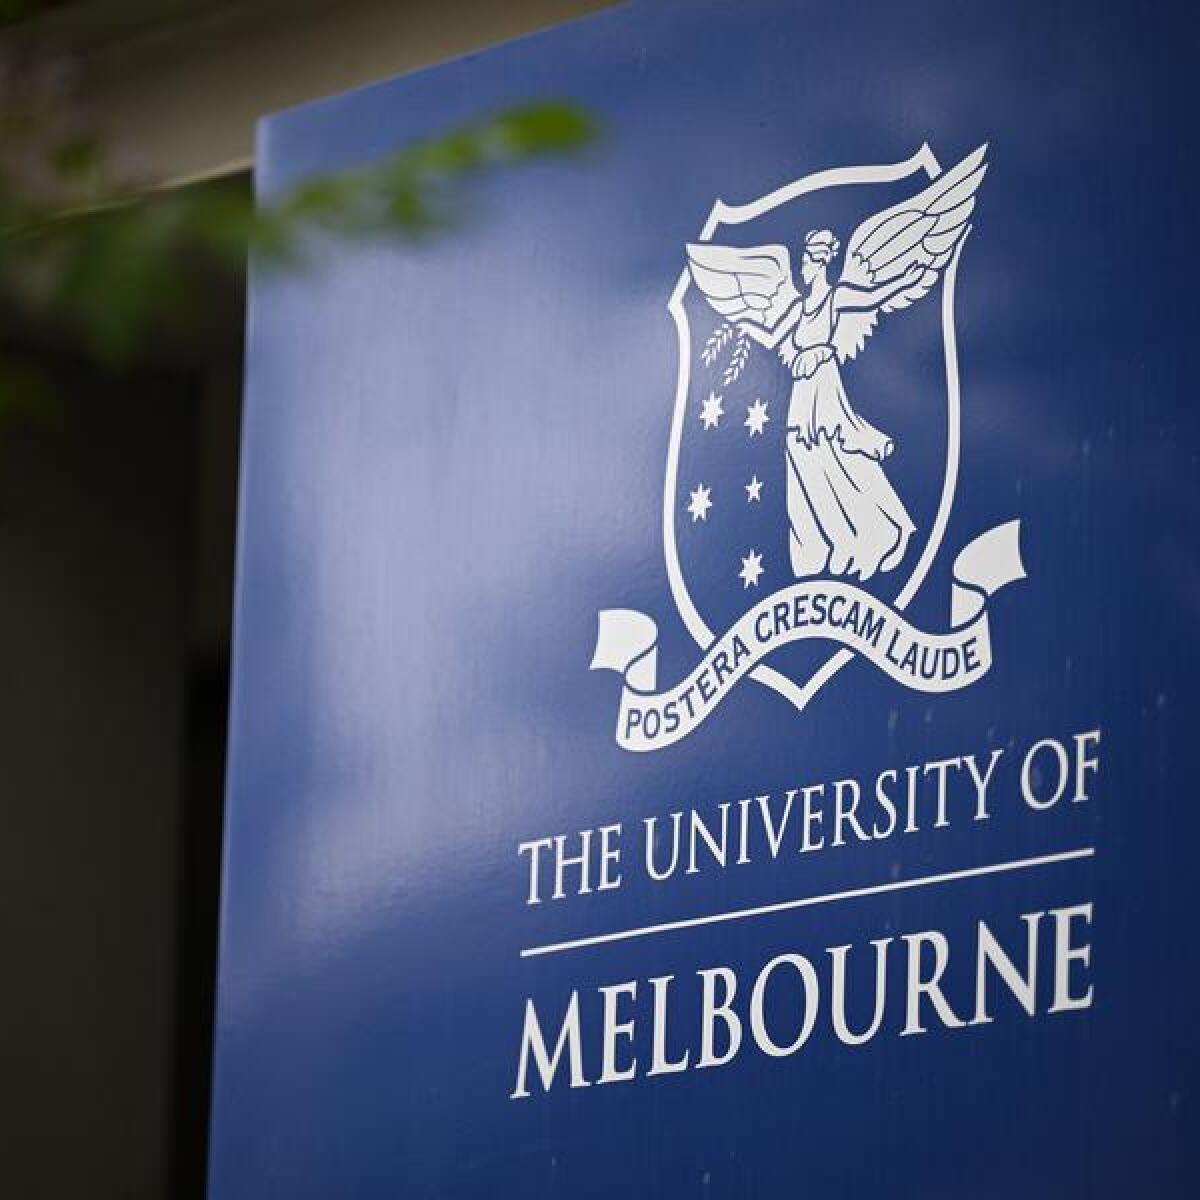 Signage for The University of Melbourne